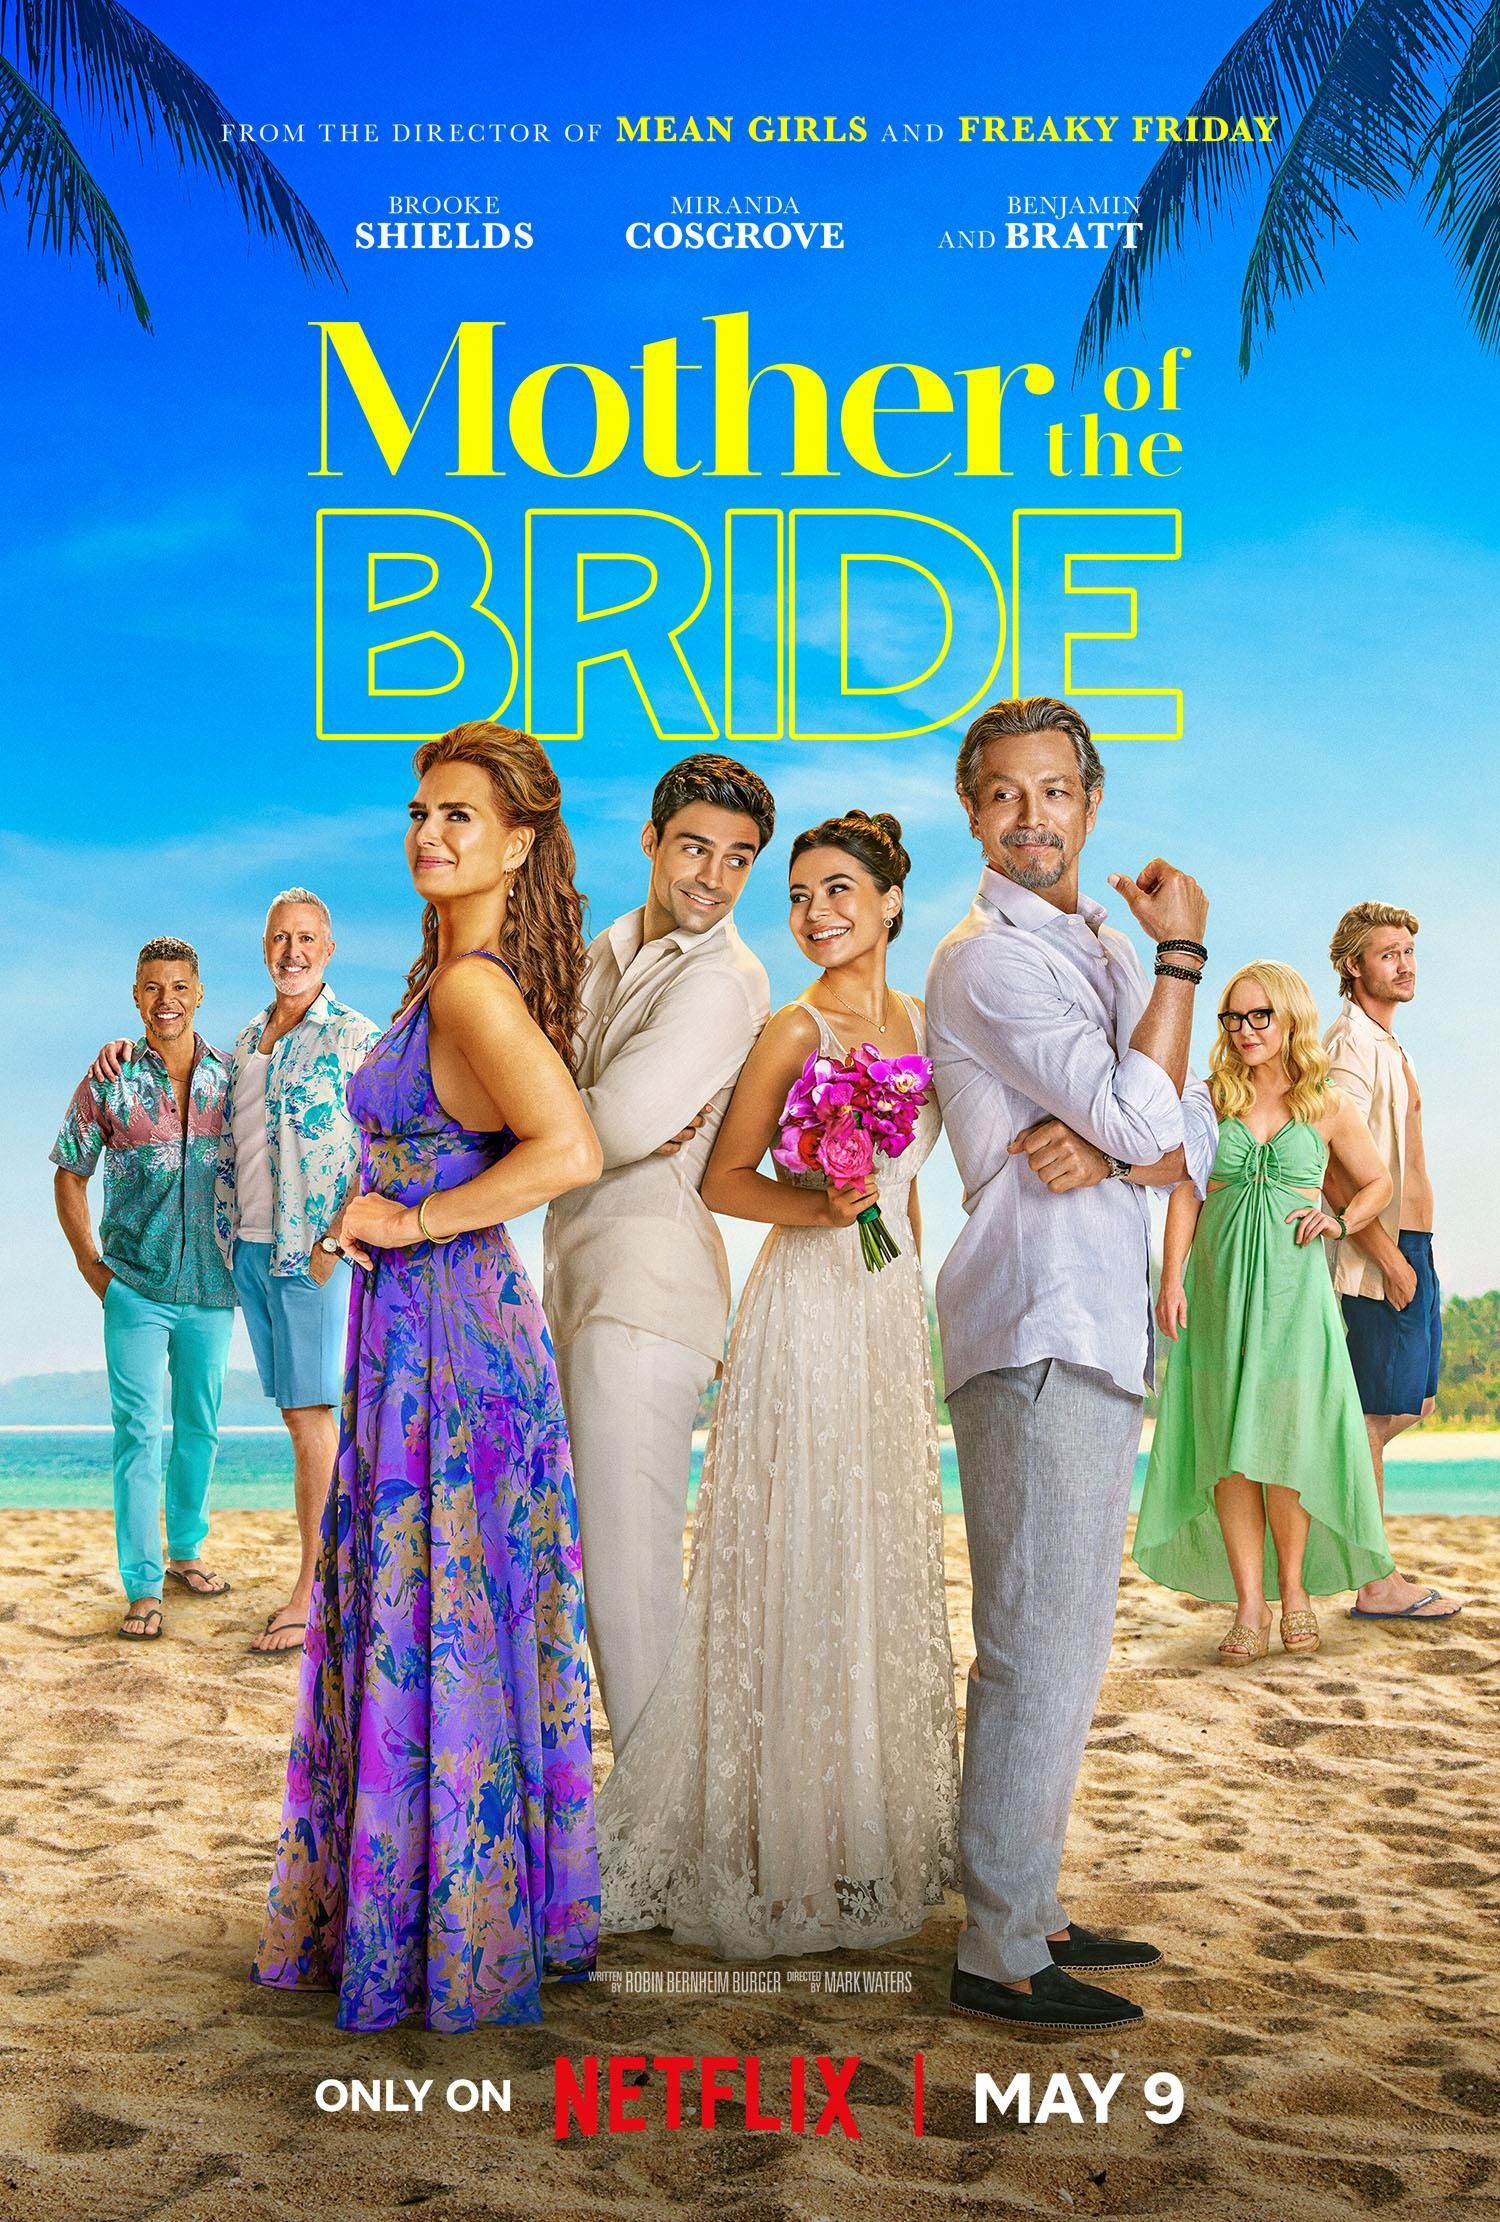 Mother of the Bride Movie Poster Showing Brook Shields, Miranda Cosgrove and Benjamin Bratt Standing on a Beach